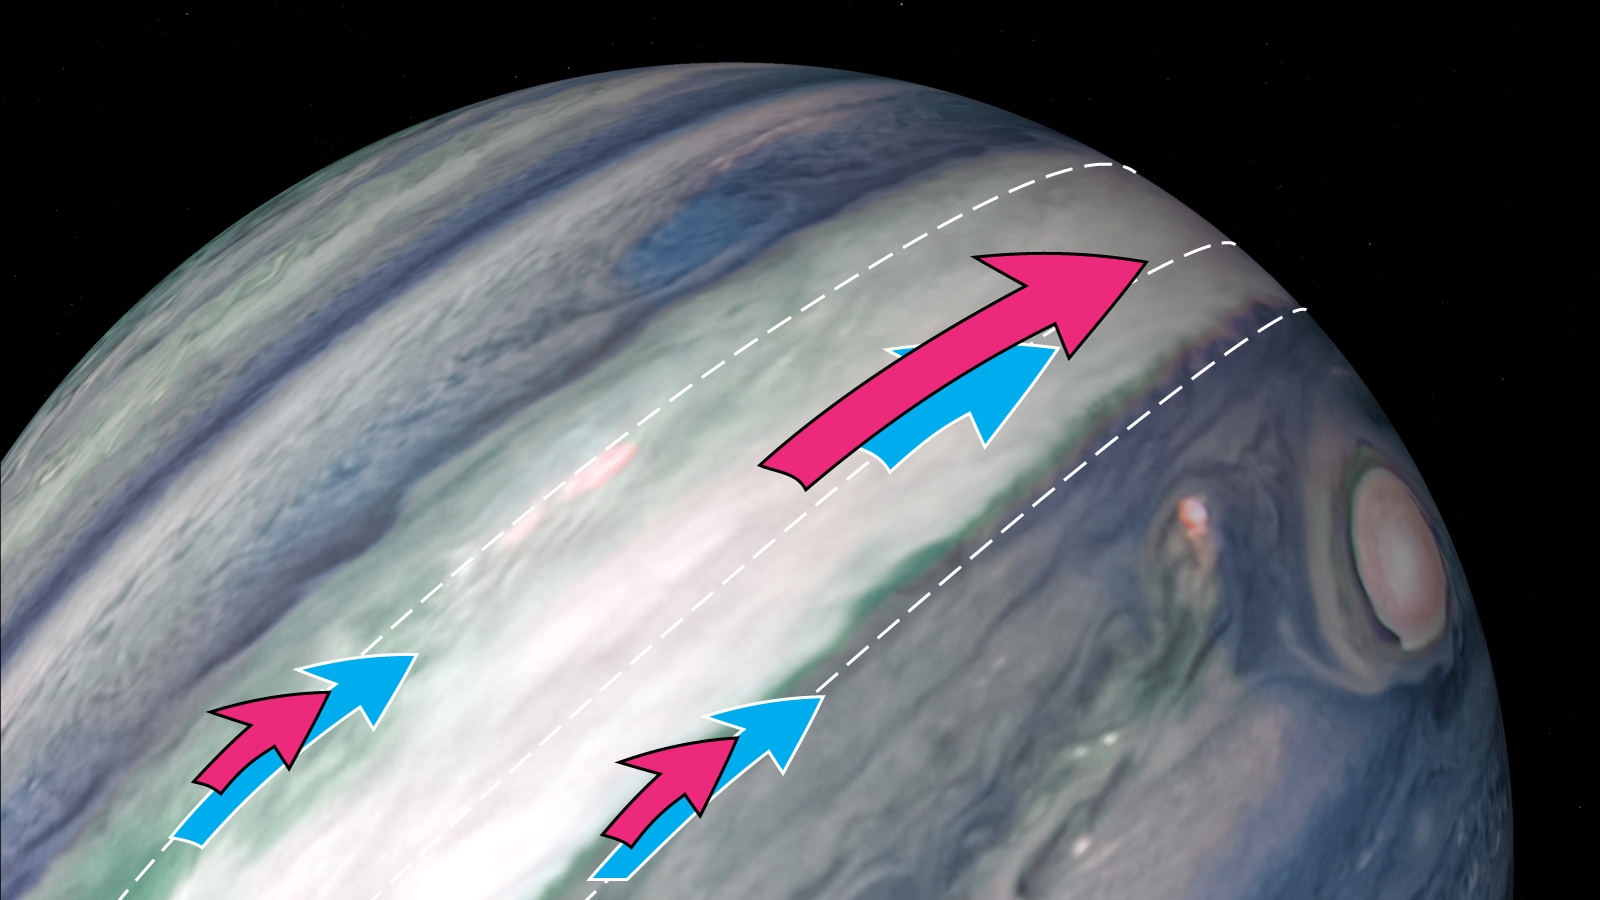 colorful view of Jupiter bands overlain with red and blue arrows